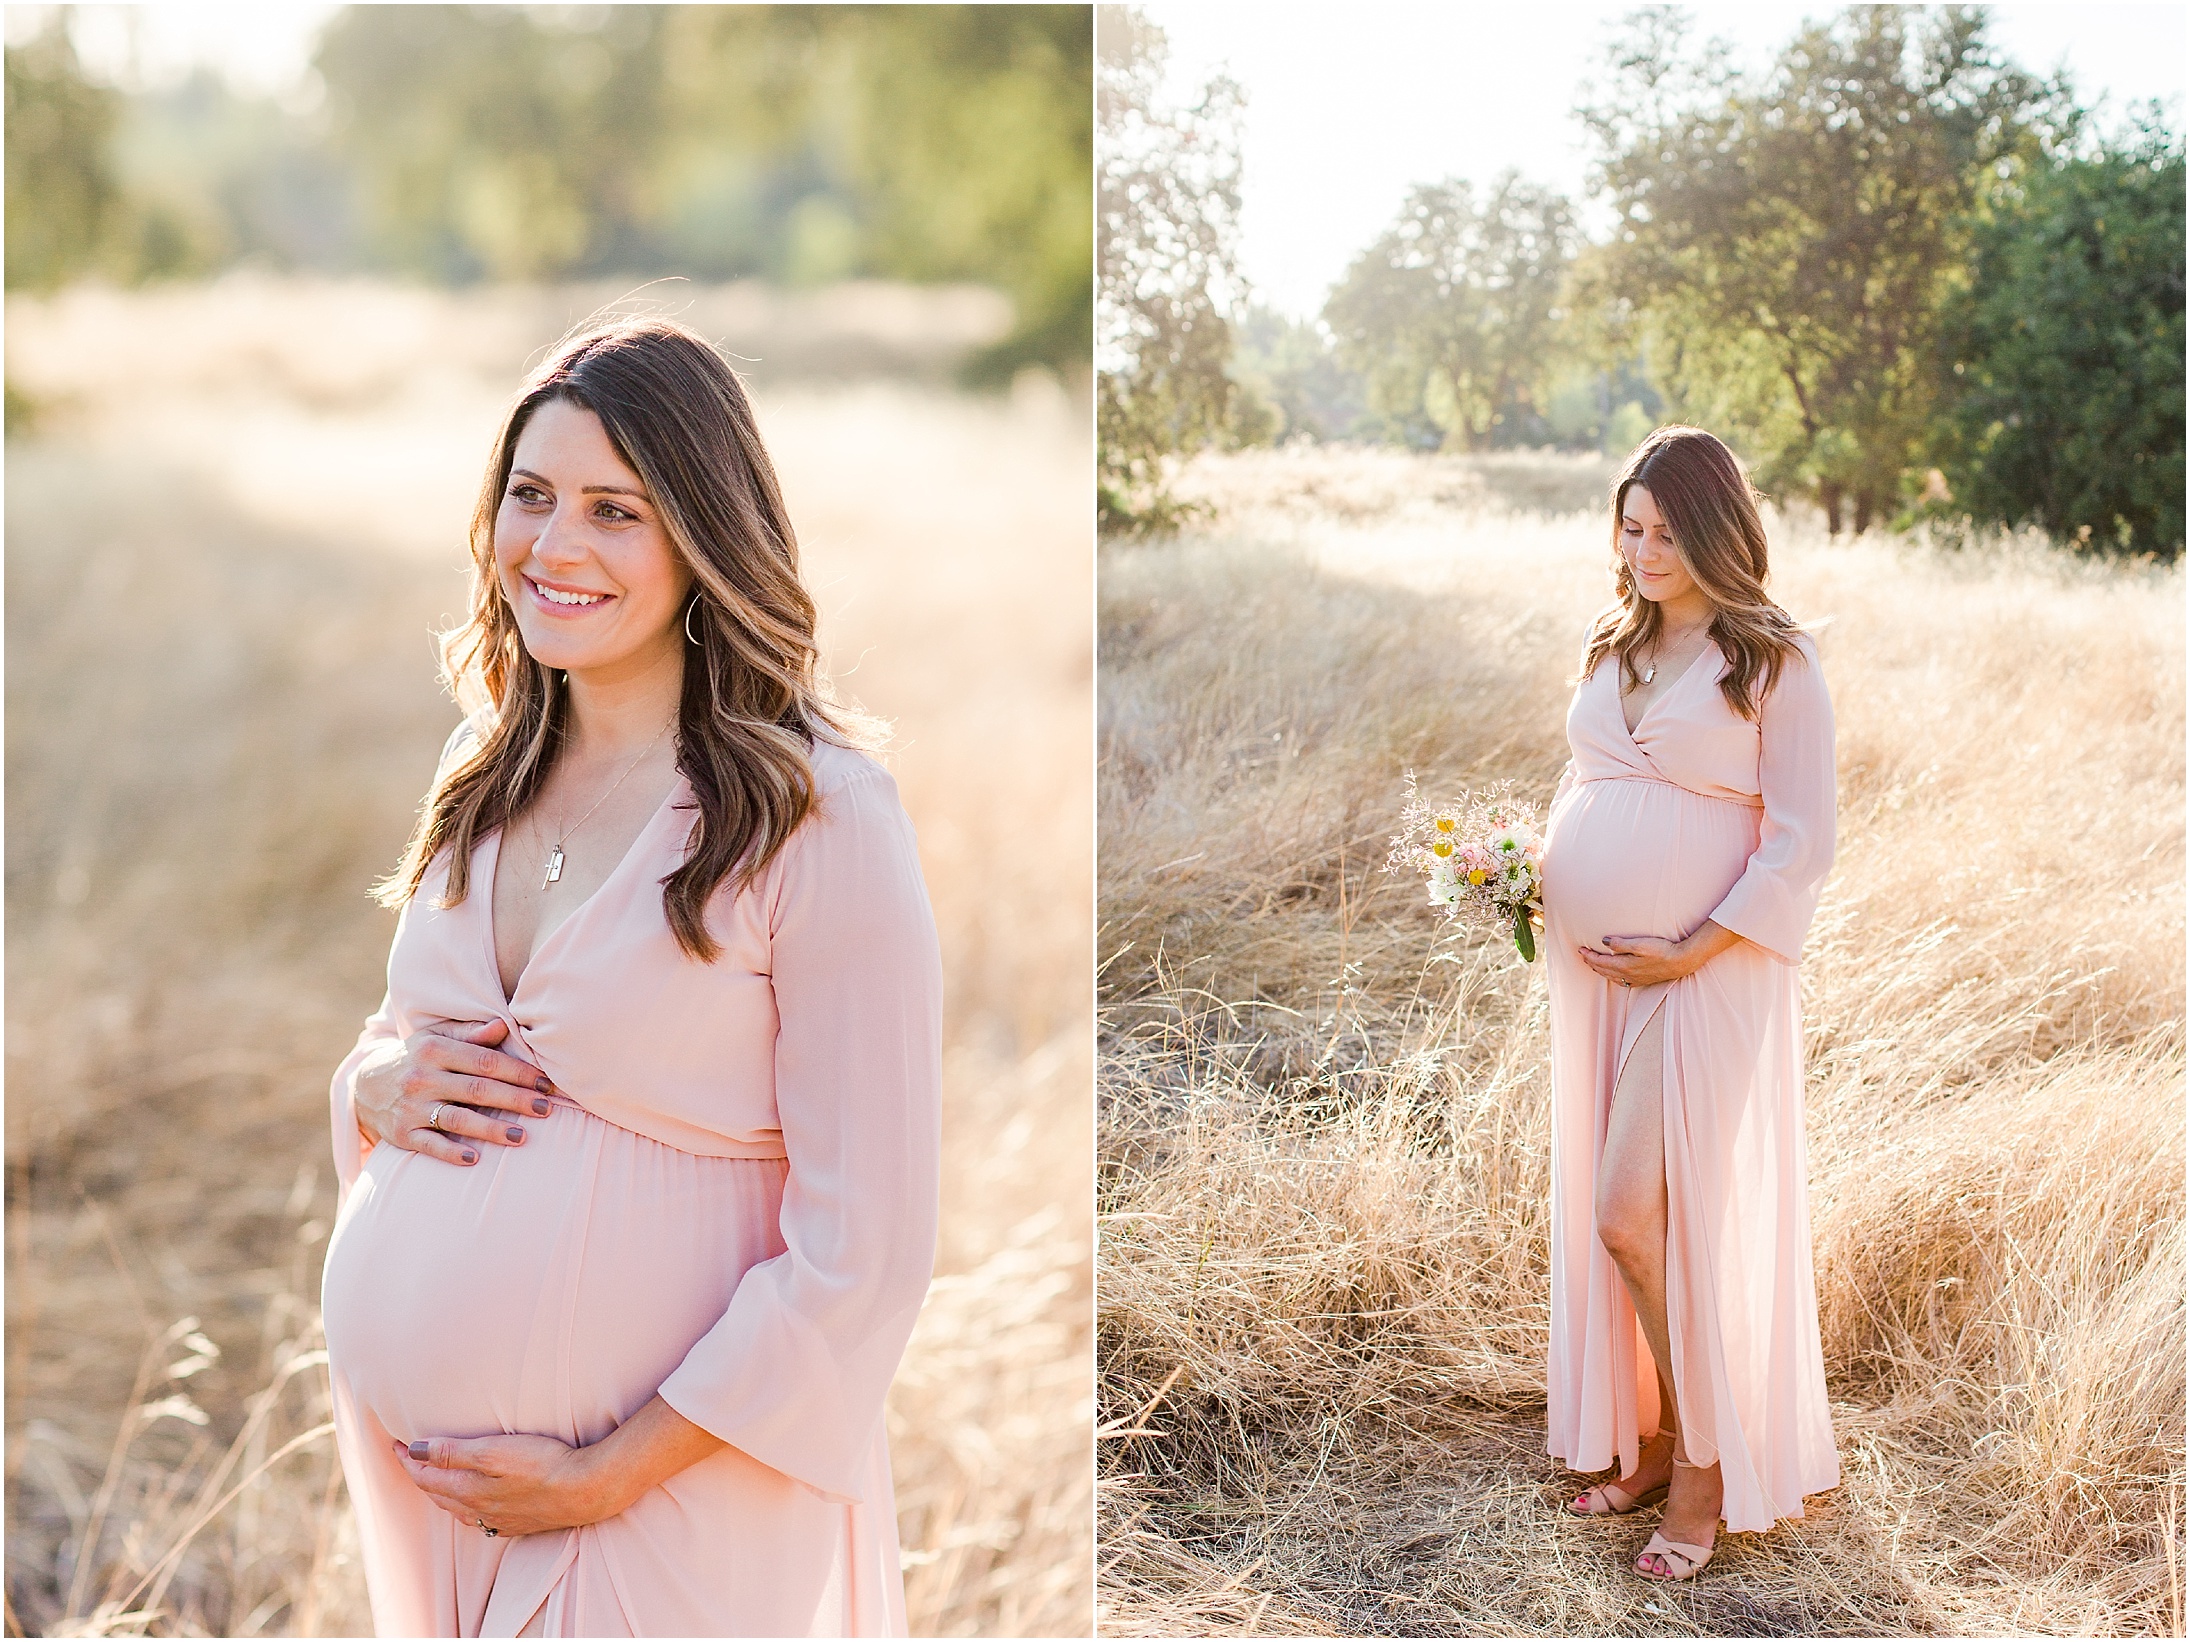 6 Tips for Amazing Maternity Portraits - Michelle Lindsay Blog